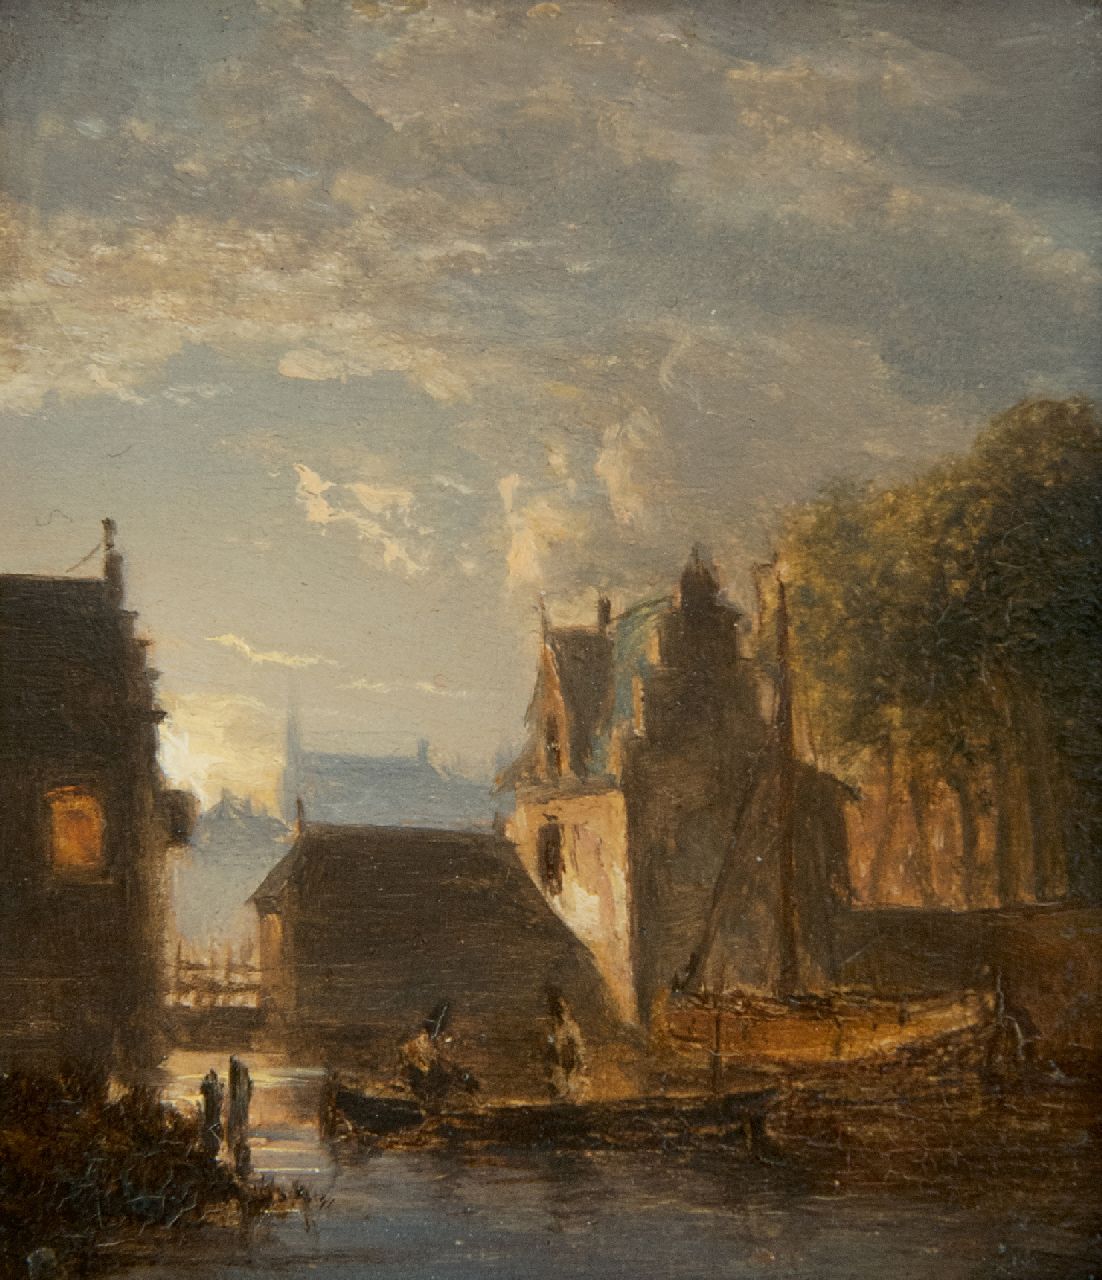 Abels J.Th.  | 'Jacobus' Theodorus Abels | Paintings offered for sale | A moonlit townview, oil on panel 7.8 x 7.0 cm